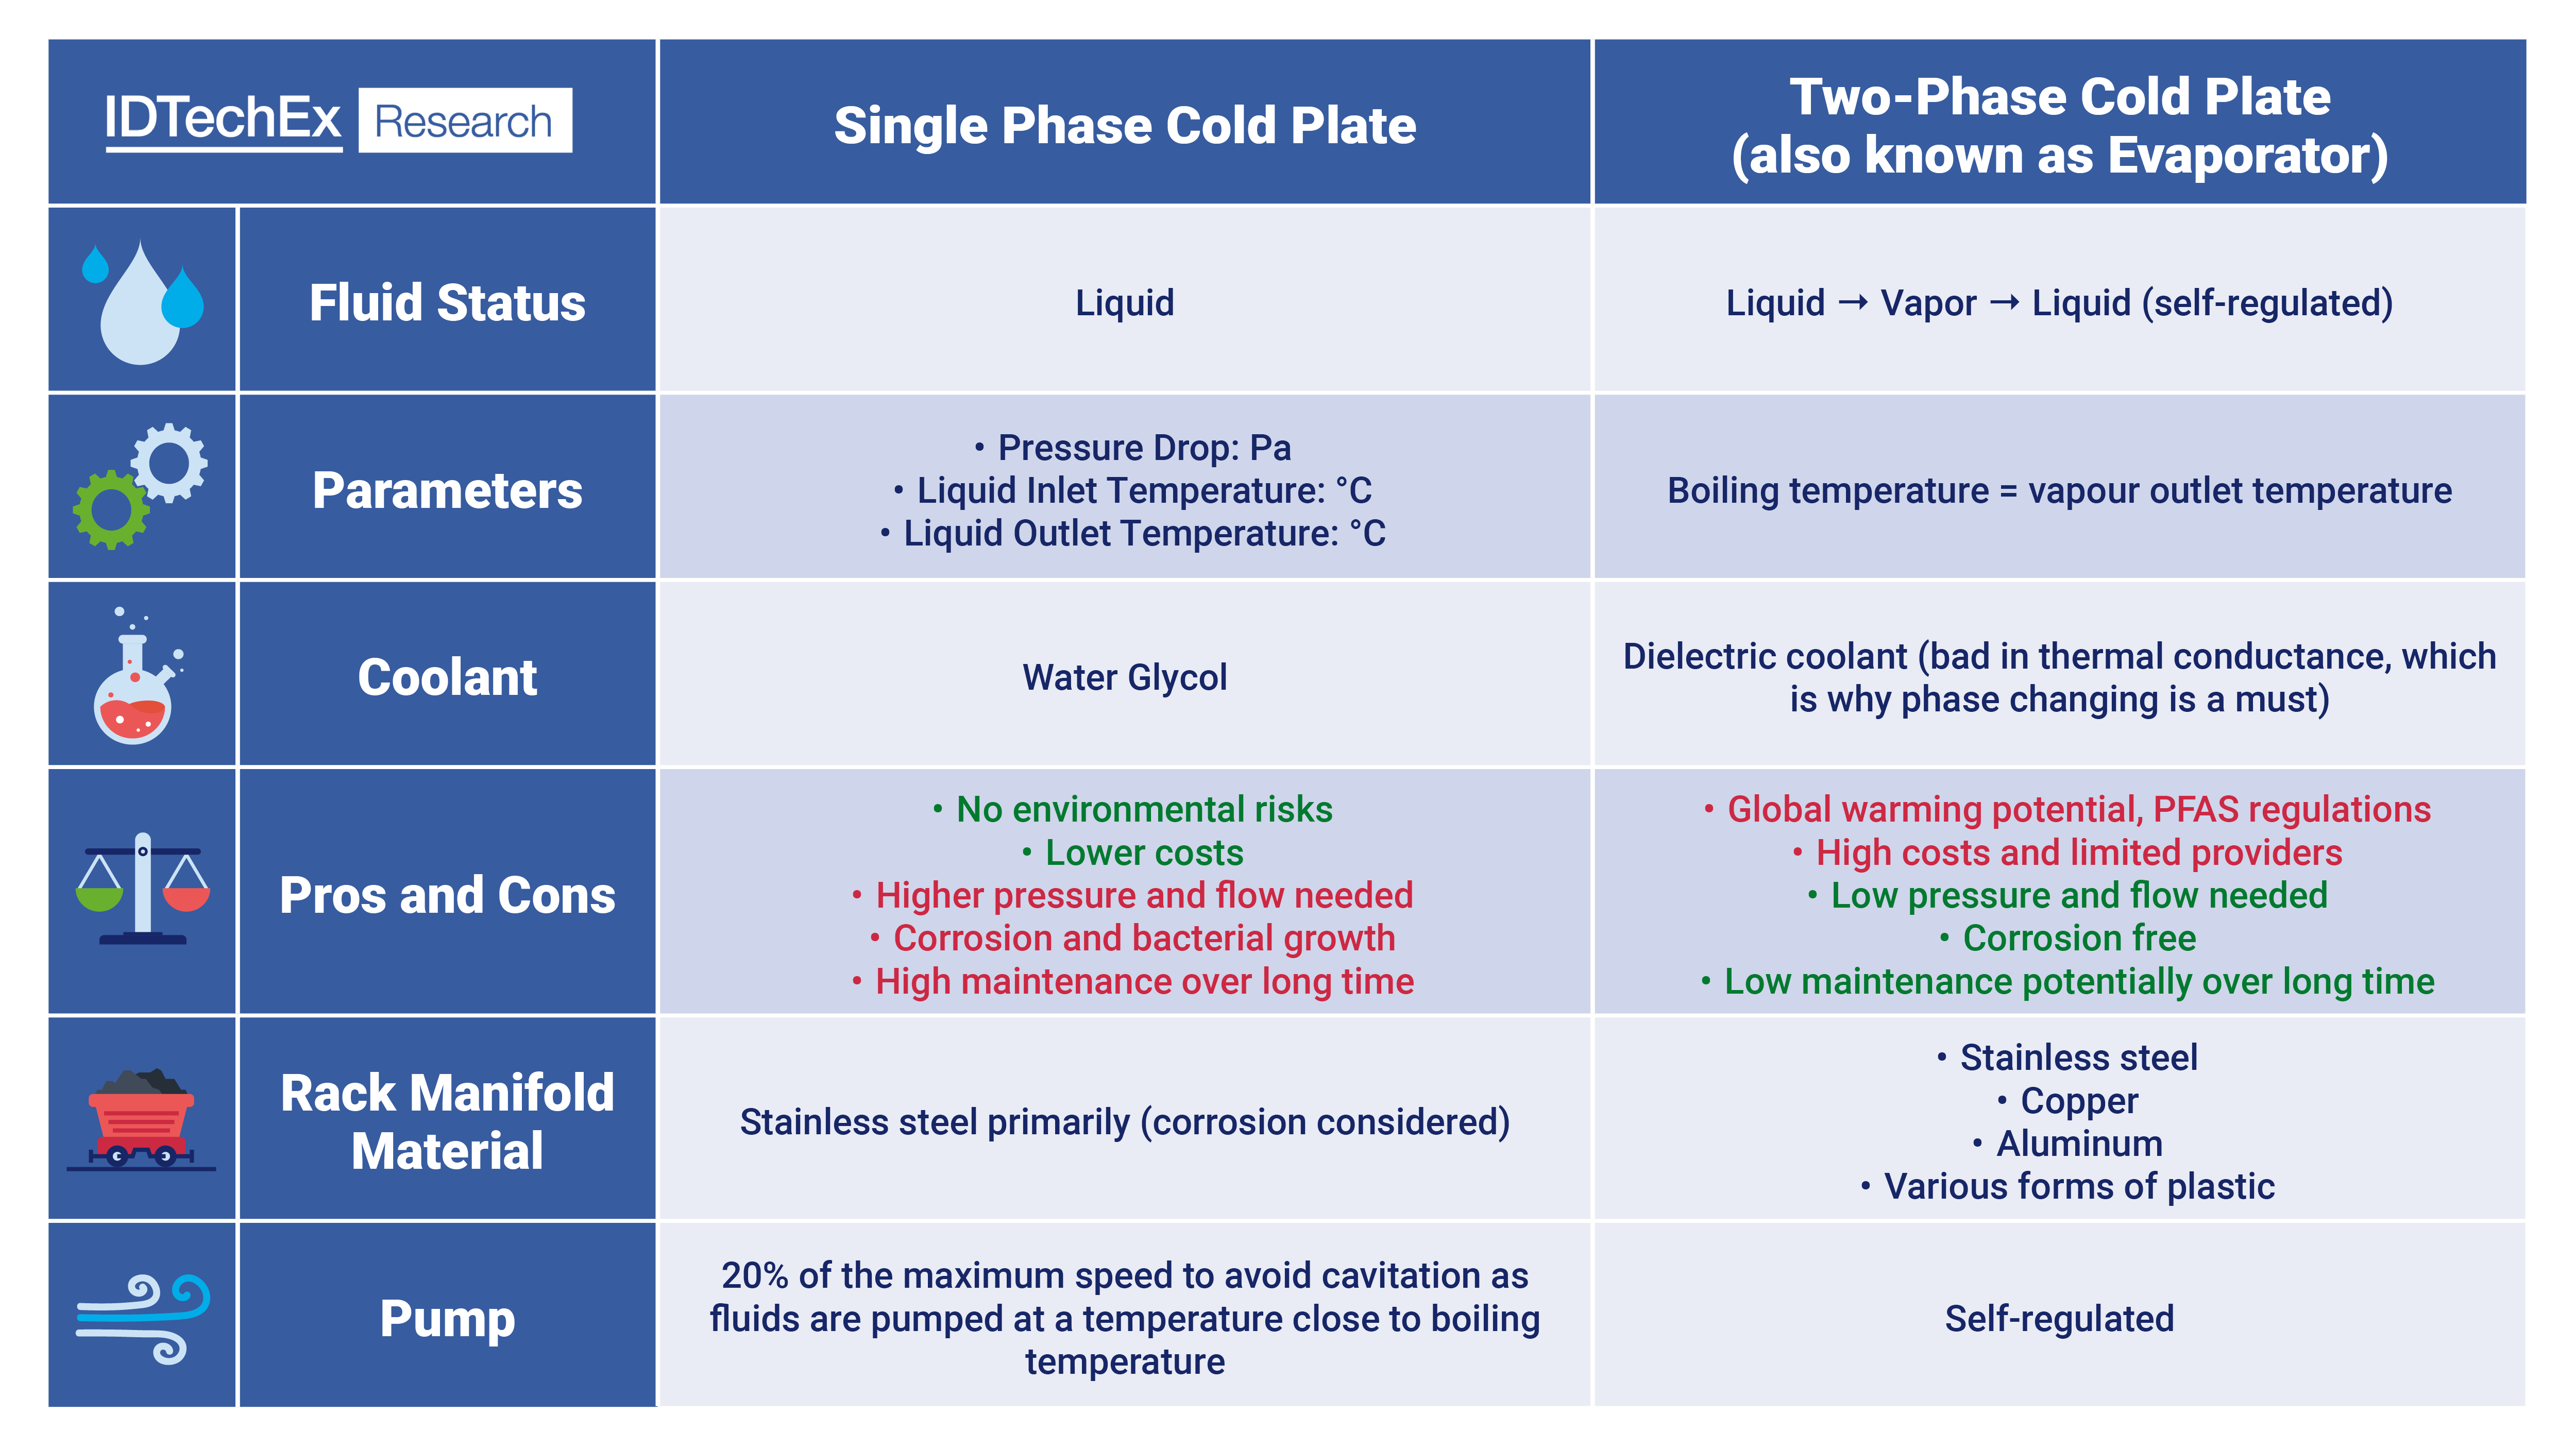 Comparison of single-phase and two-phase cold plate cooling by different benchmarks. Source: IDTechEx